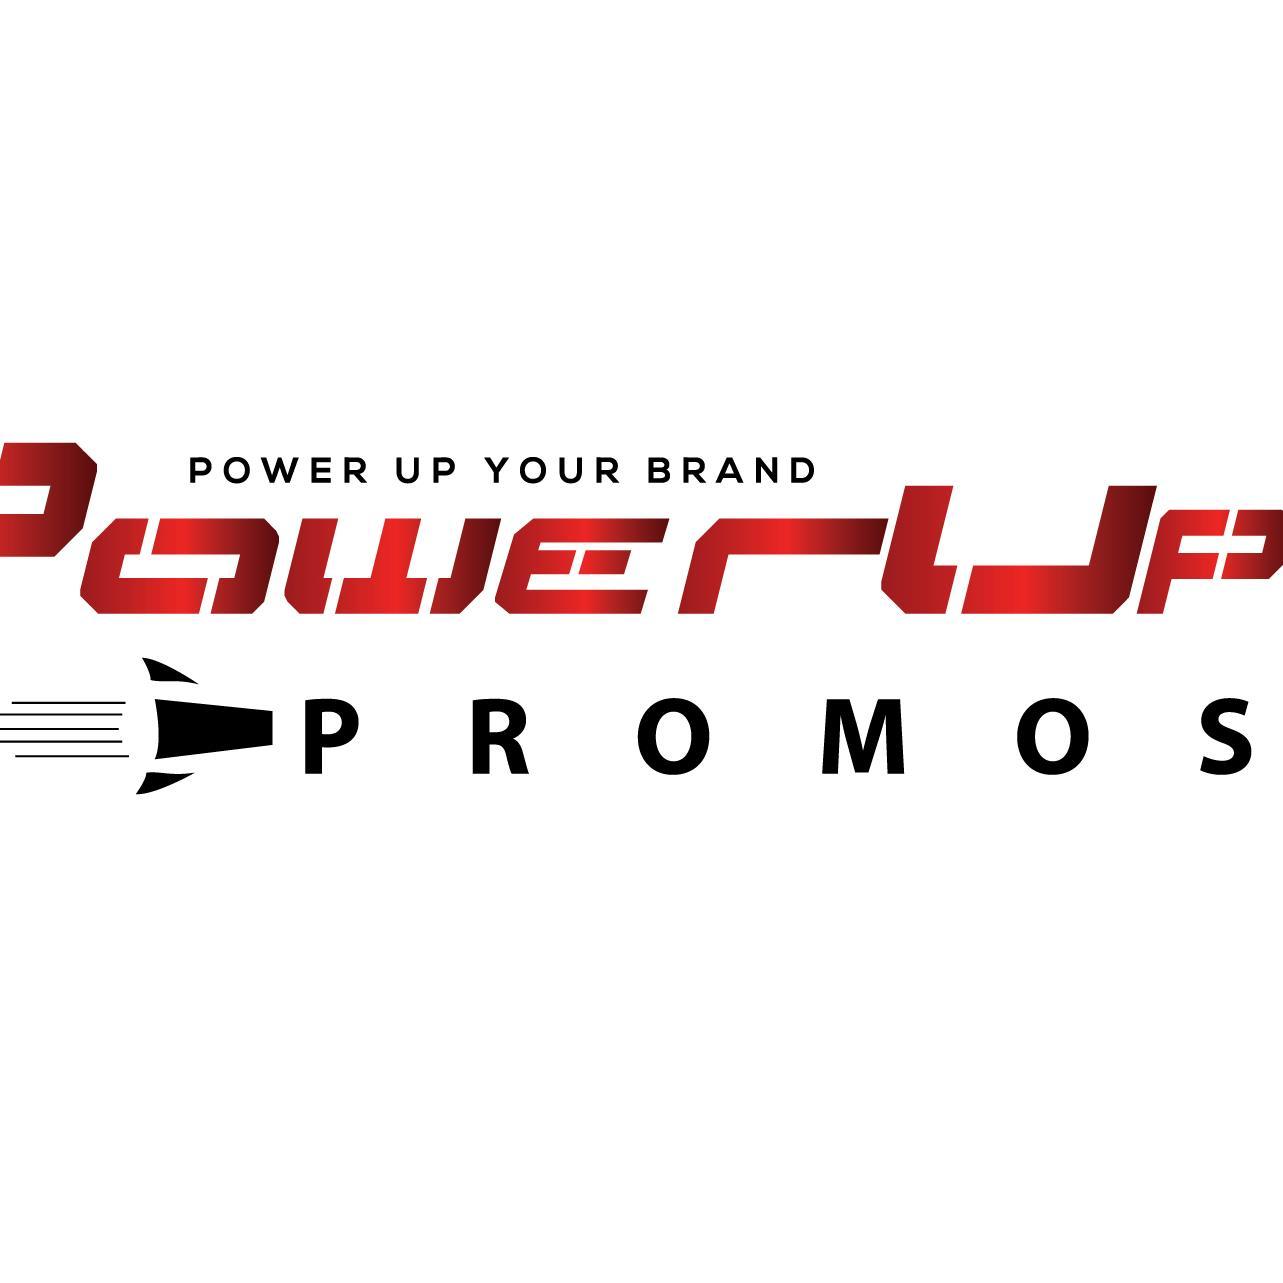 Power Up Your Brand with the widest Selection of #PromotionalProducts #PromoProducts and #Gifts at the best prices info@PowerUpPromos.com